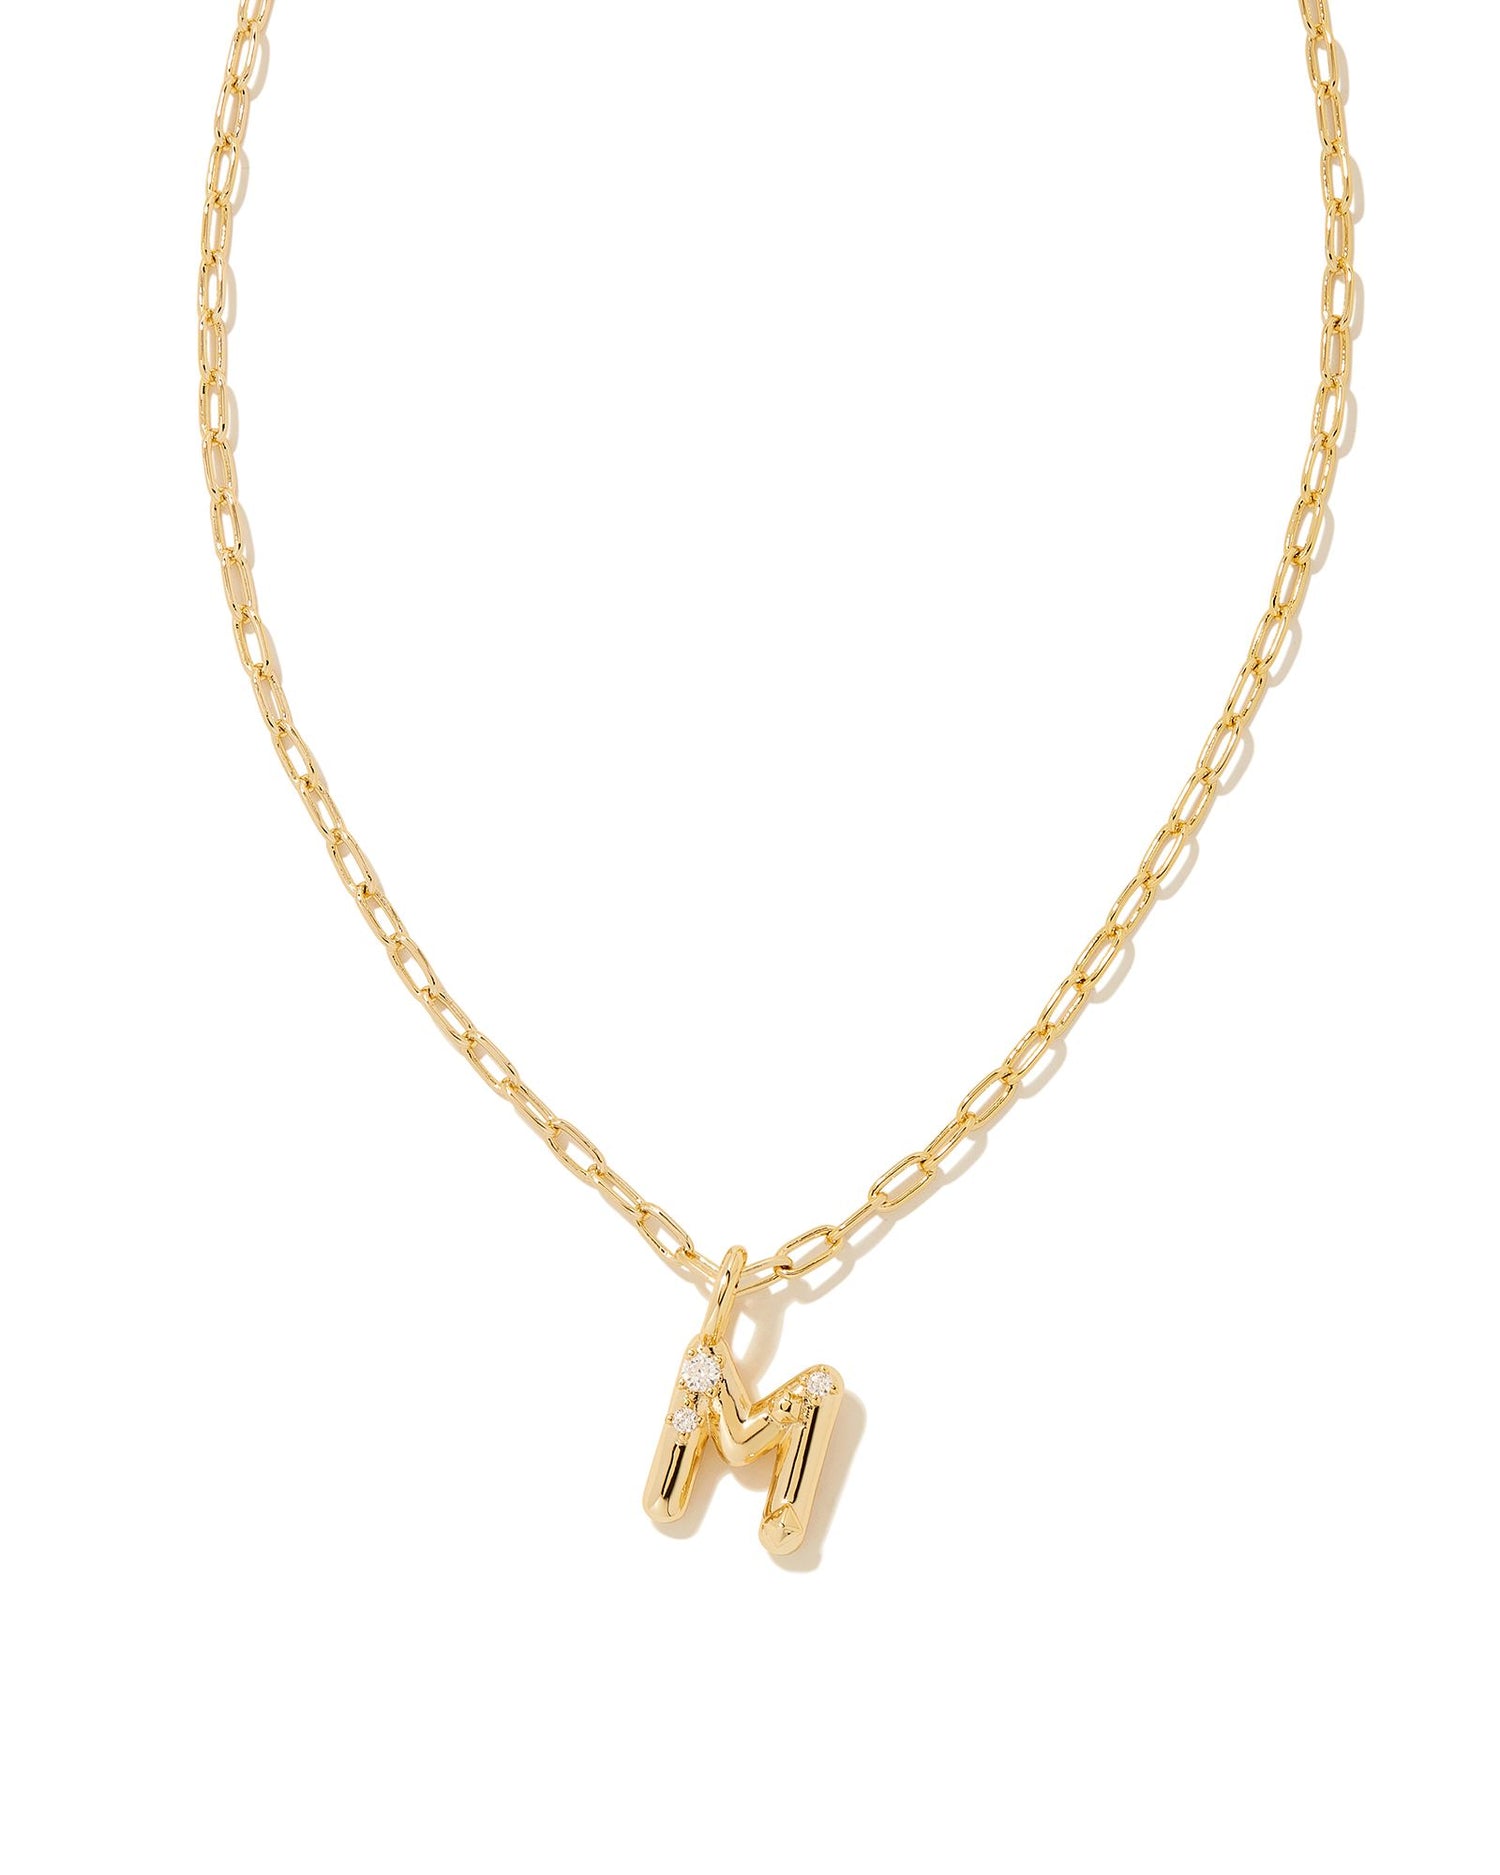 Personalize your everyday look with the Crystal Letter Short Pendant Necklace in White Crystal. Whether you’re rocking your initial or a loved one’s, this sentimental layer is one you’ll keep coming back to again and again.  Dimensions- 16' CHAIN WITH 3' EXTENDER, 0.62'L X 0.35"W PENDANT Metal- 14K Gold plated over brass Closure- Lobster Clasp Material-   White CZ Letter M